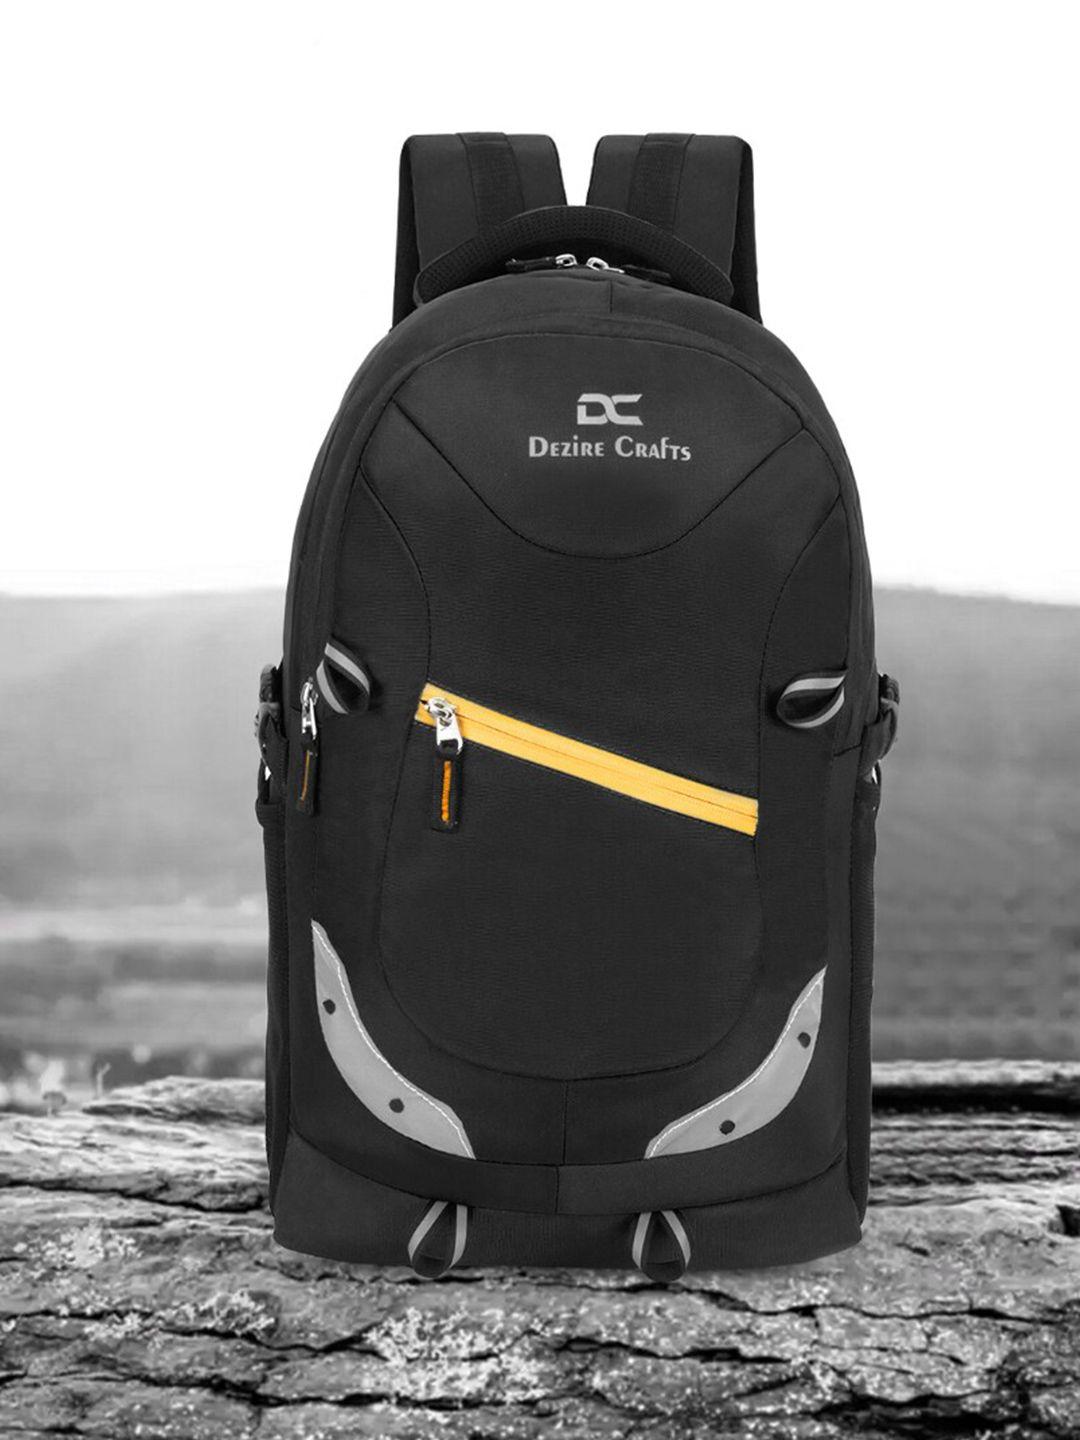 dezire crafts unisex black backpack with reflective strip